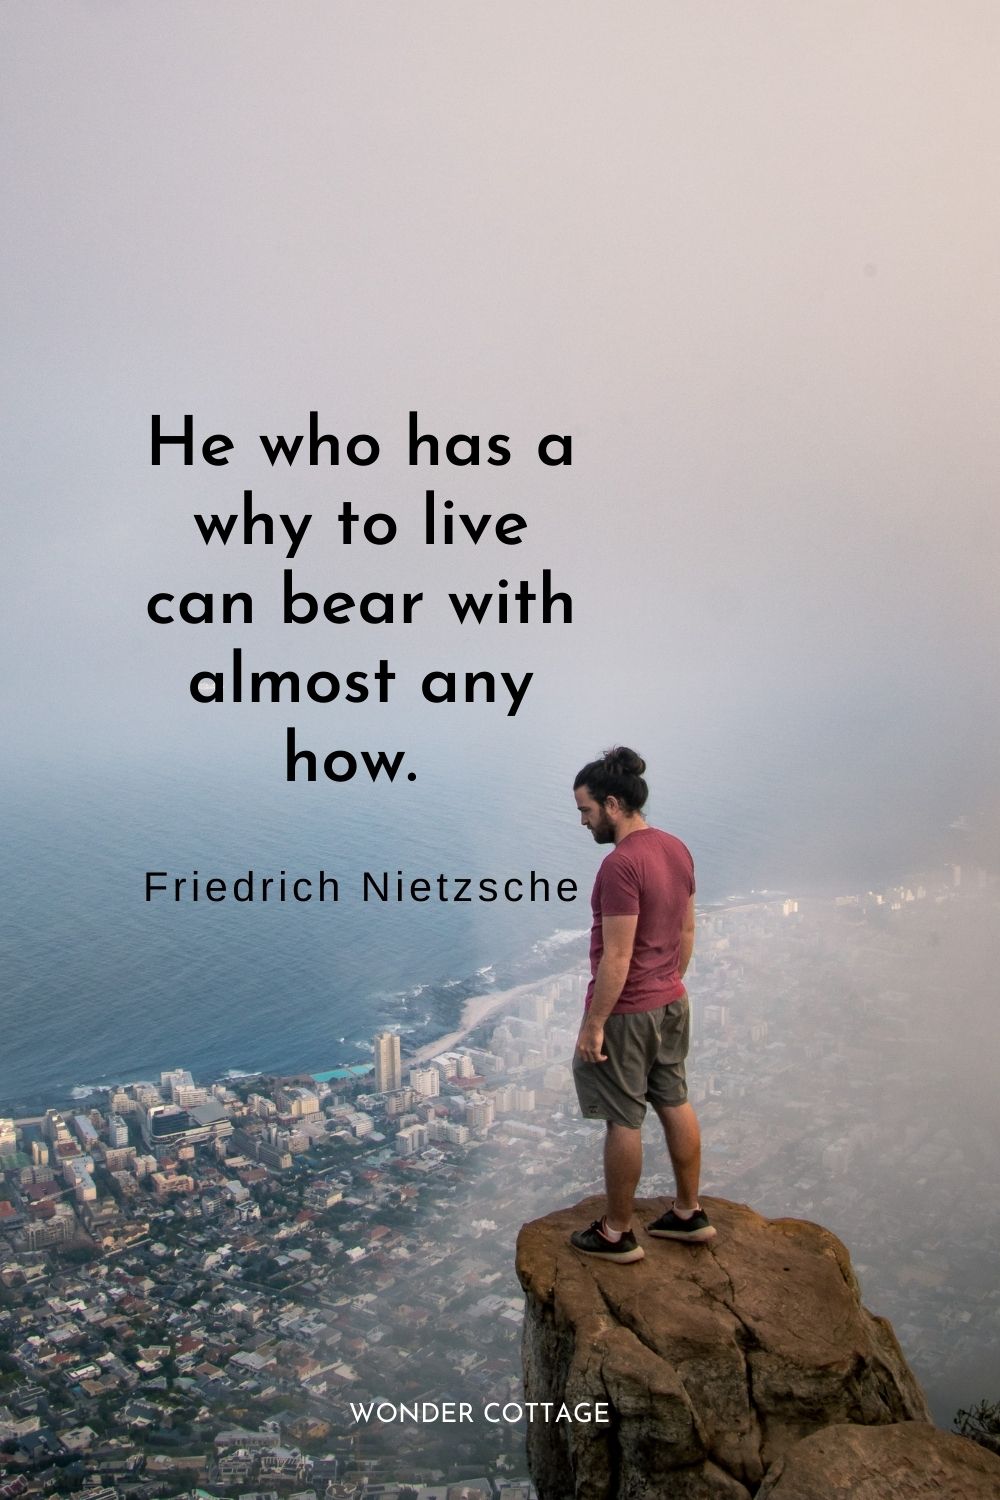 He who has a why to live can bear with almost any how.  Friedrich Nietzsche